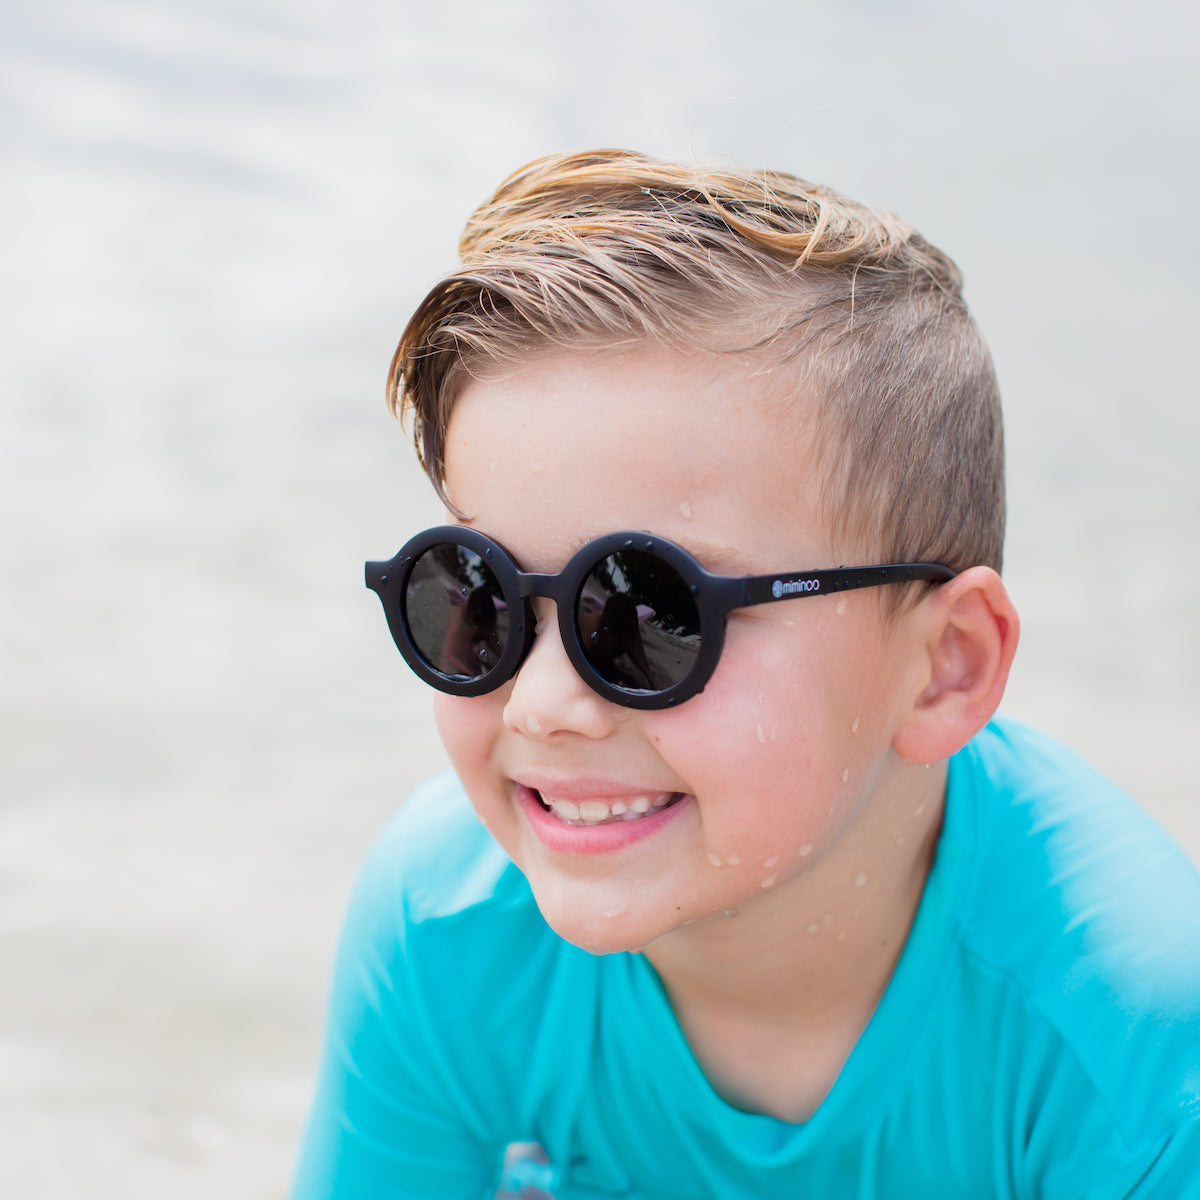 Unbreakable youth Sunglasses: Discover Polarized Sunglasses for